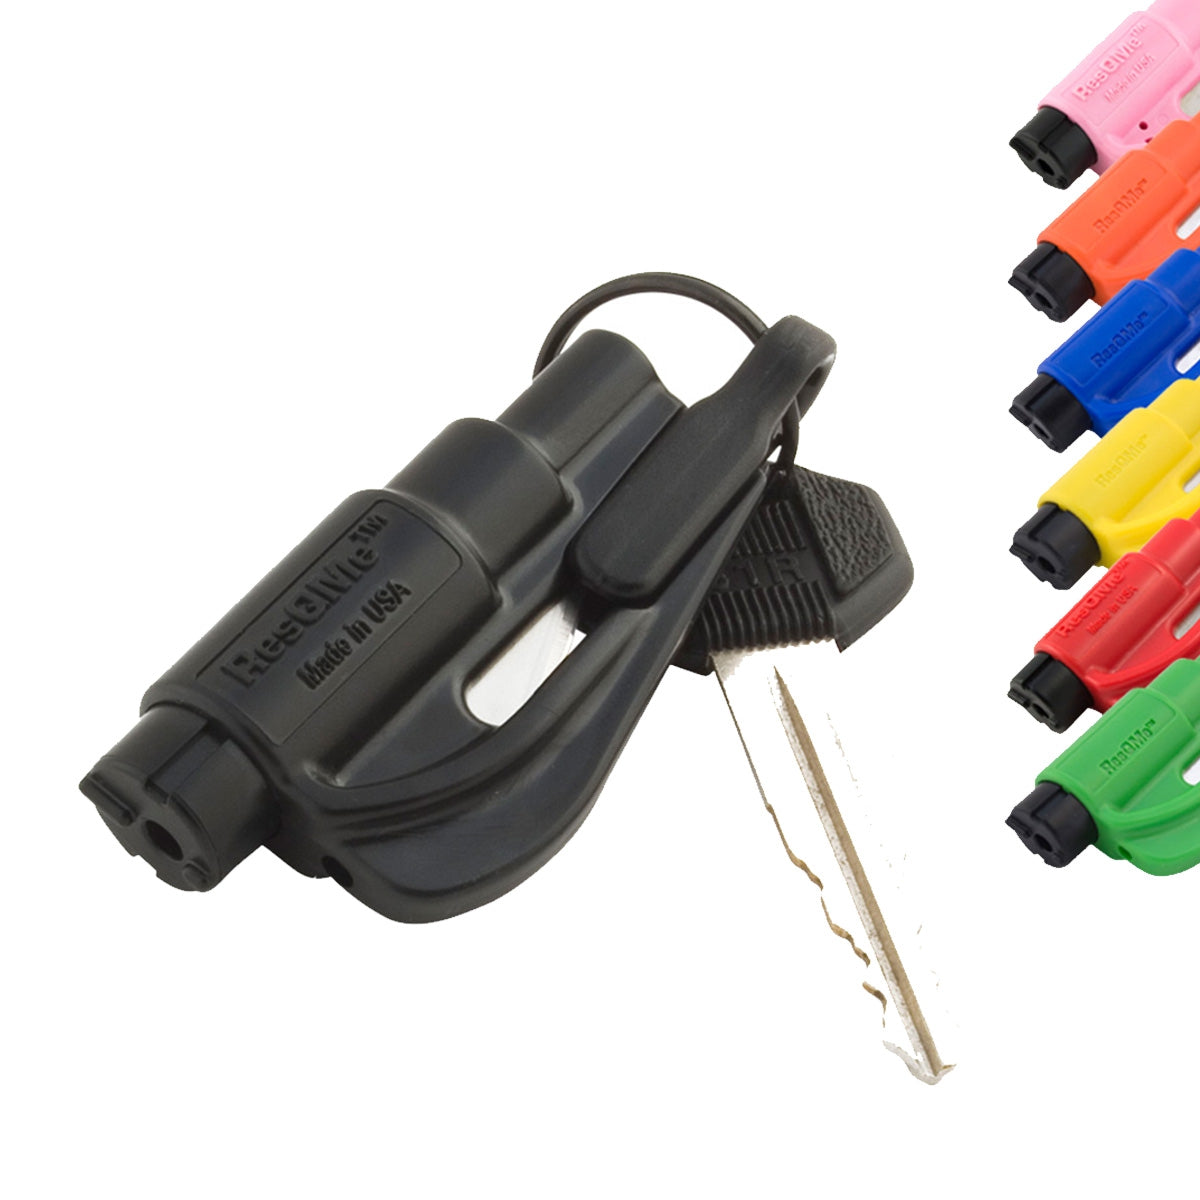 Resqume - rescue tool with keychain